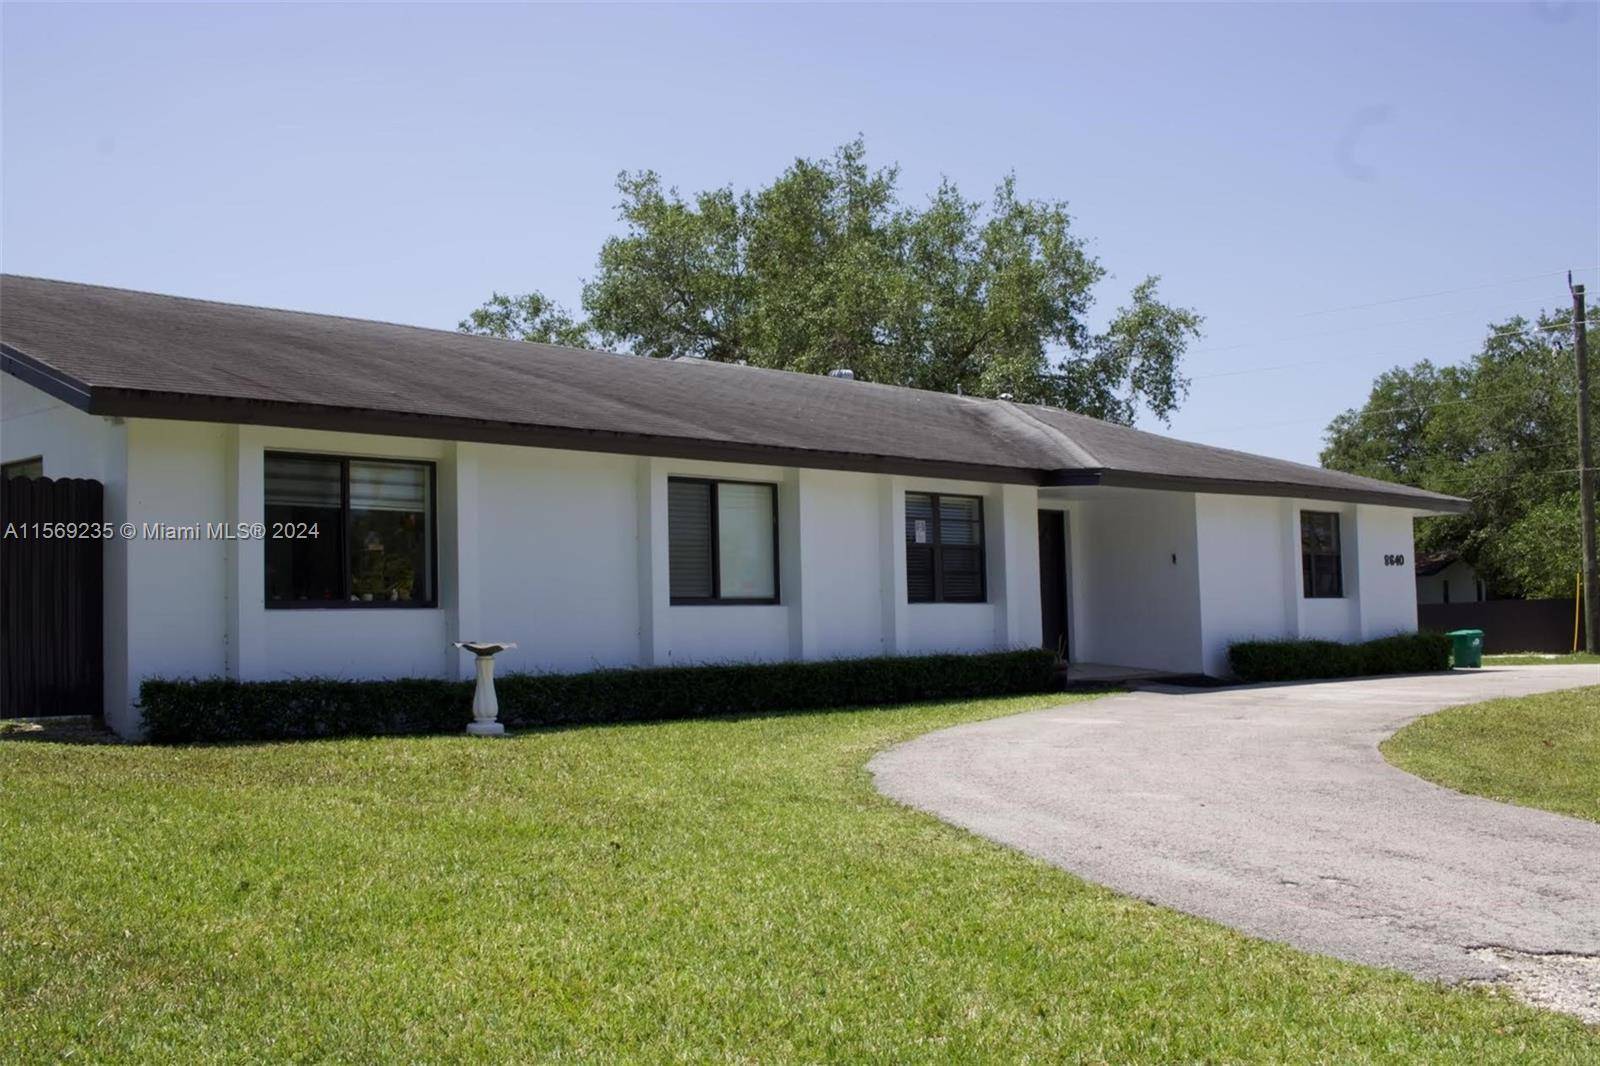 Great opportunity to purchase a licensed ALF located in Cutler Bay with Real Estate.